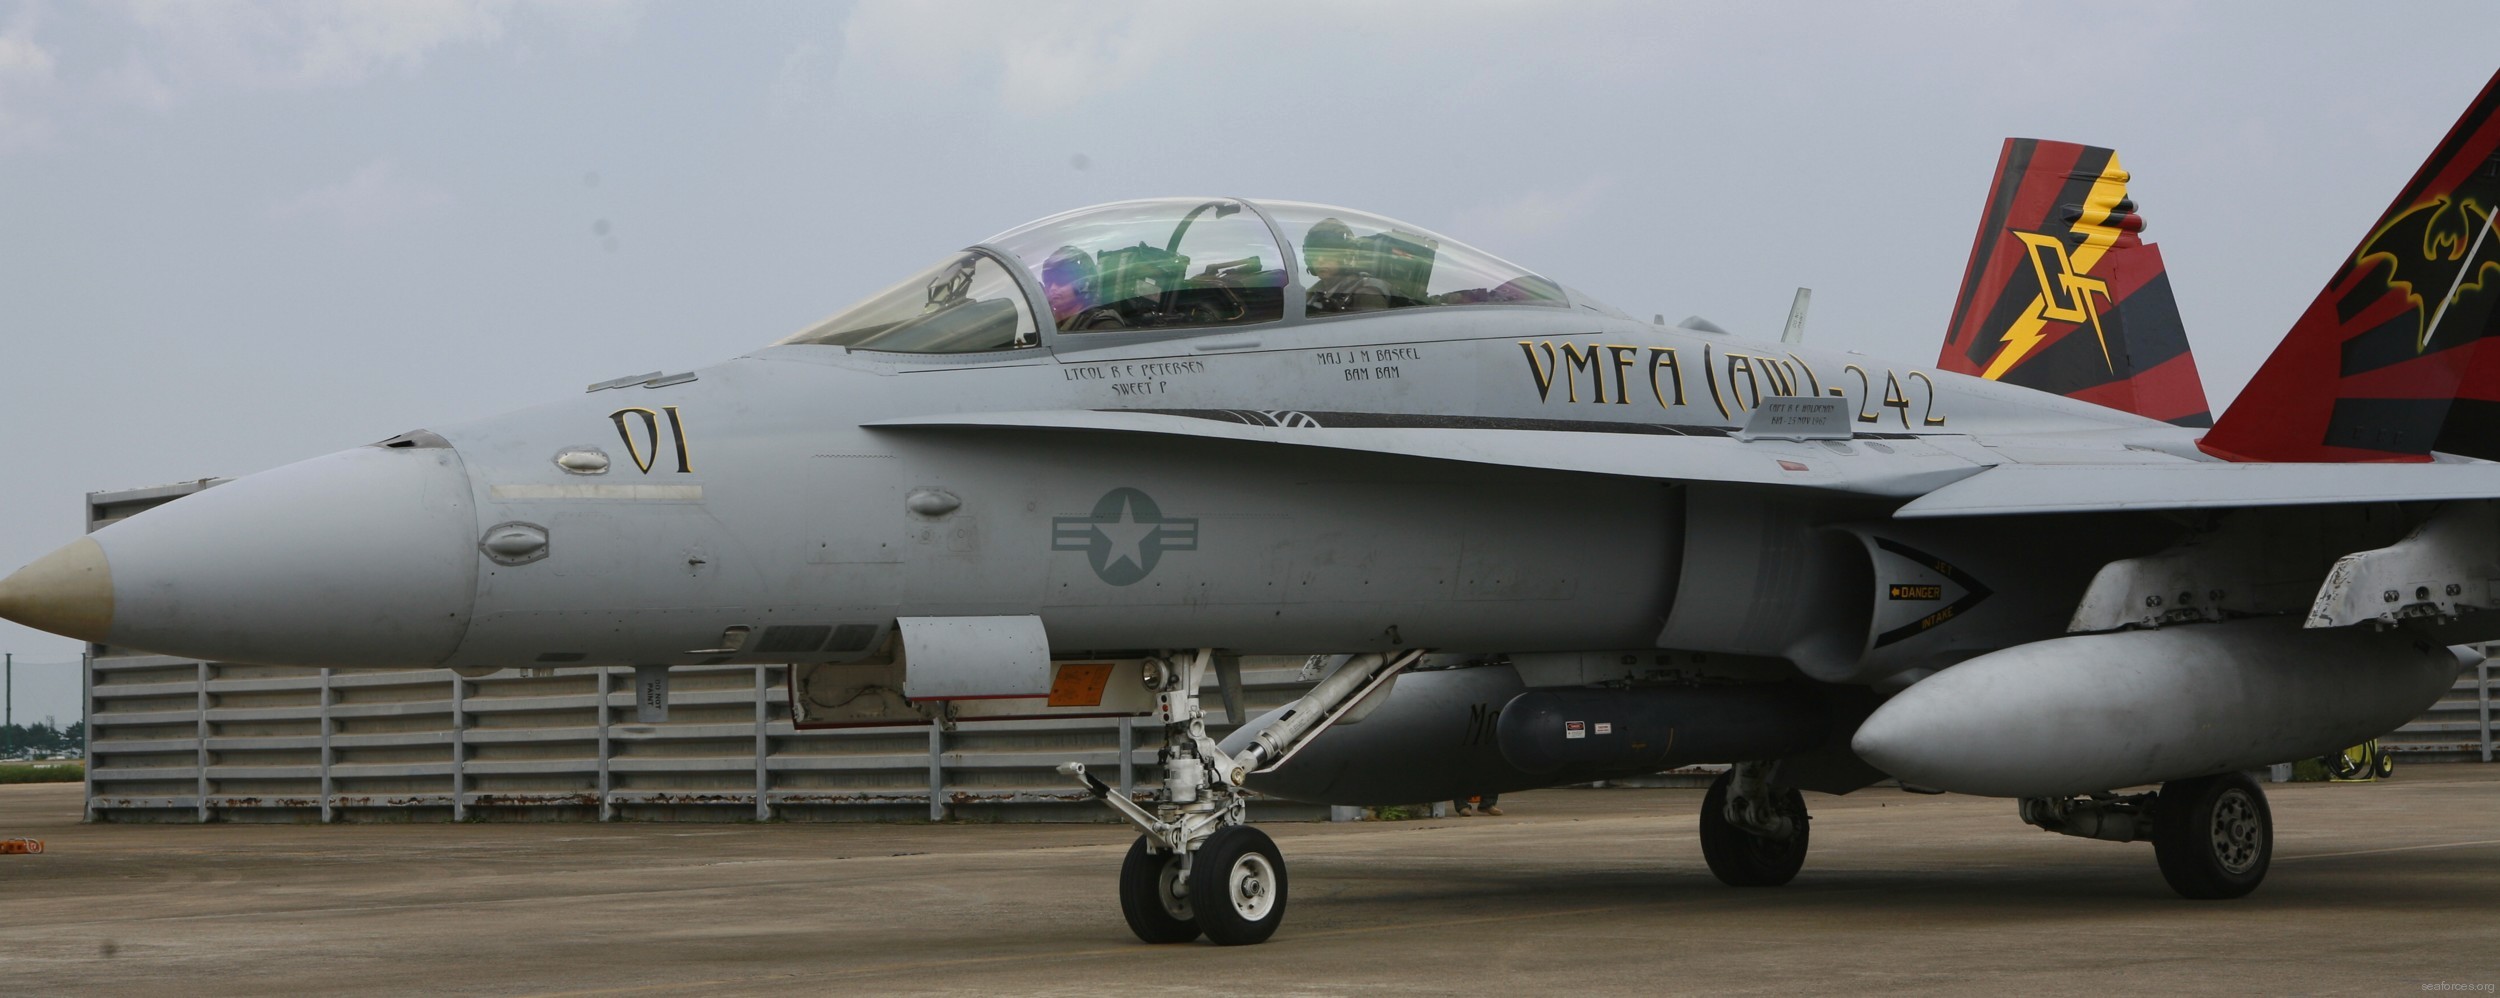 vmfa(aw)-242 bats marine all-weather fighter attack squadron usmc f/a-18d hornet 11